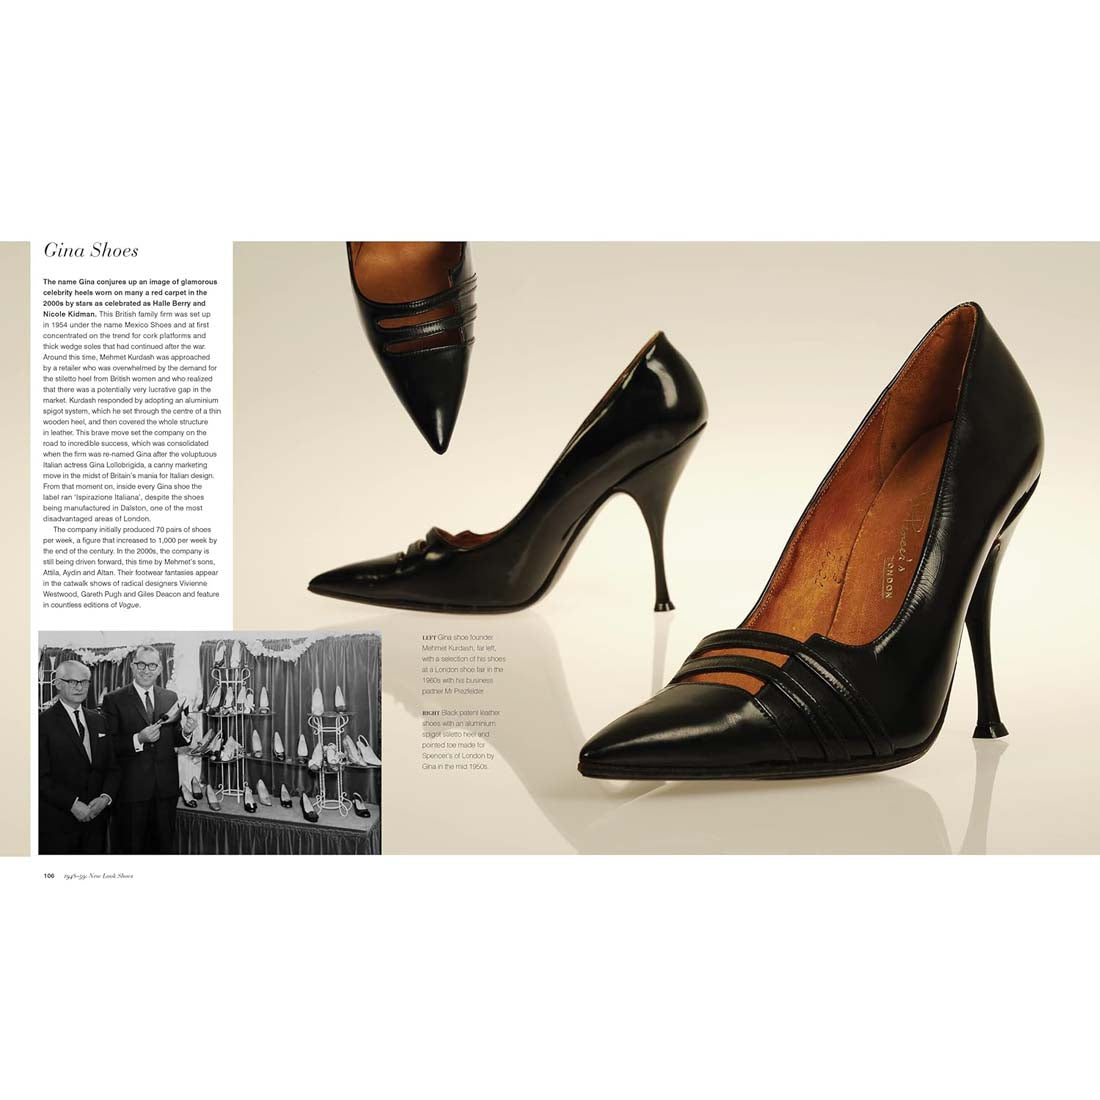 Vintage Shoes: Collecting and Wearing Designer Classics